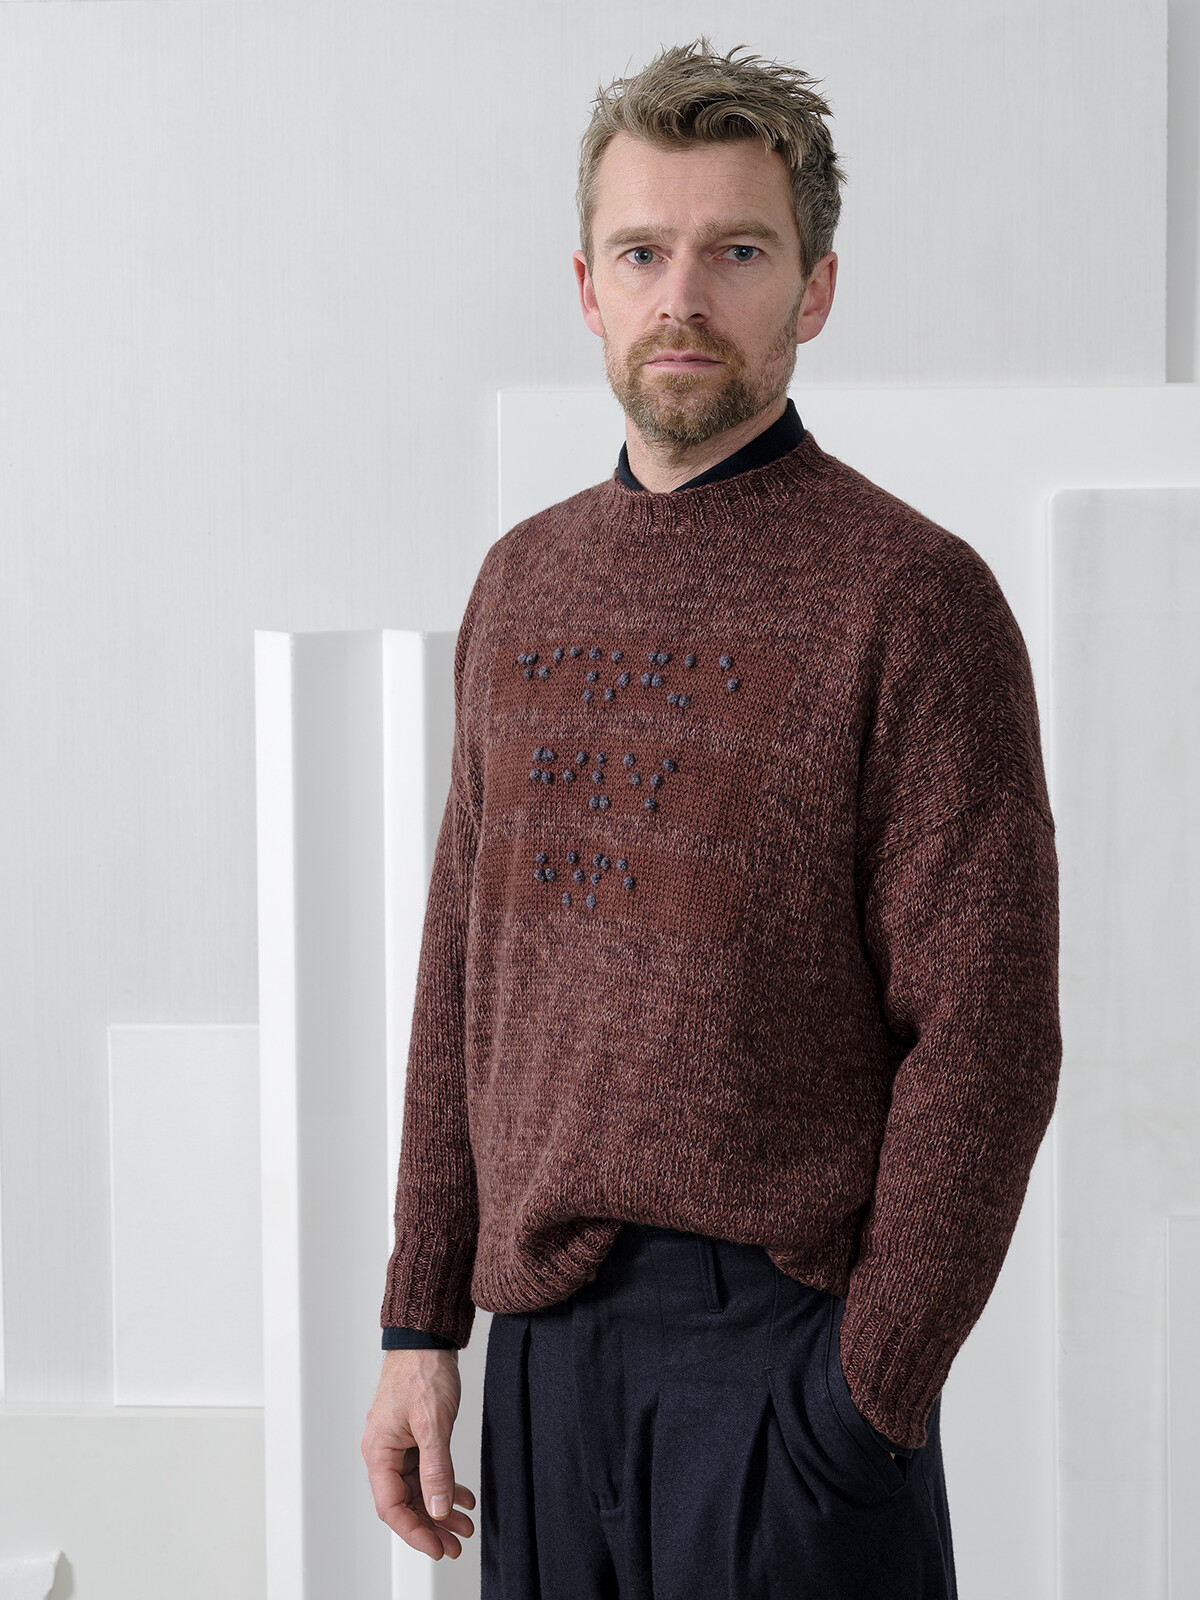 Braille sweater Image